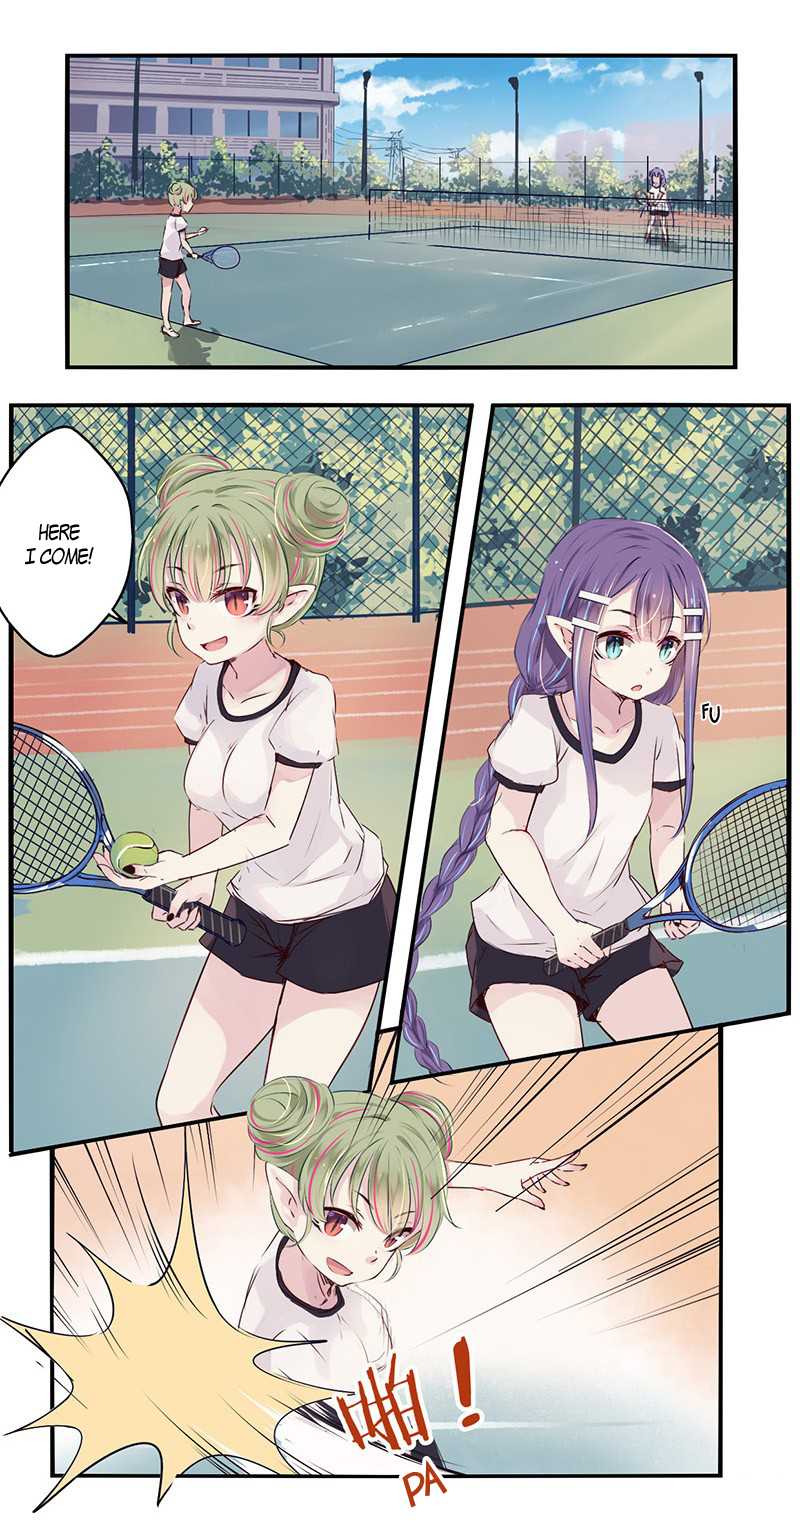 Monsters Chapter 32: Tennis Ball?